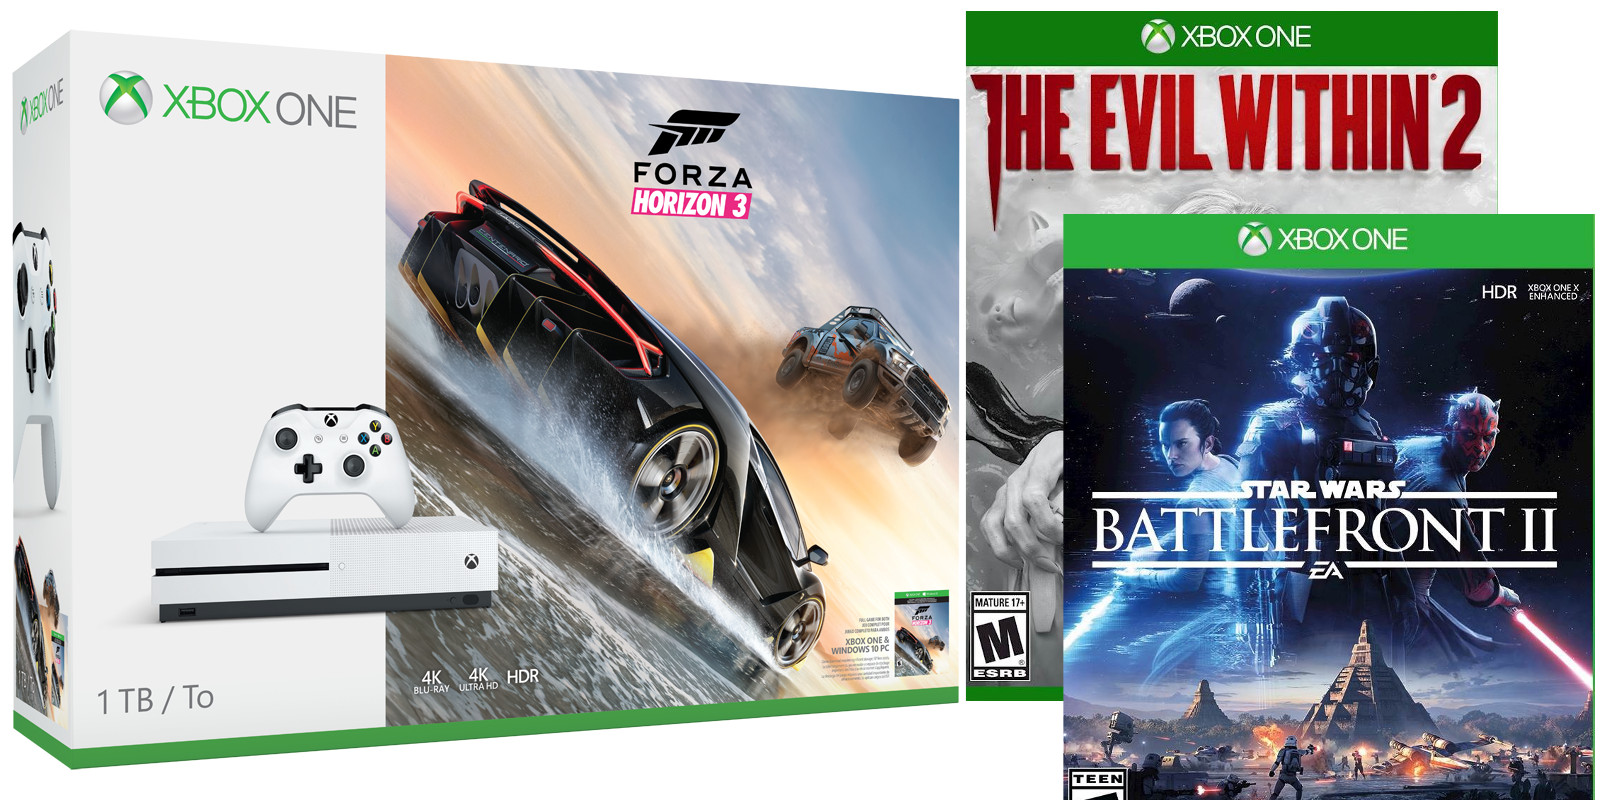 today-s-best-game-deals-forza-3-xbox-one-s-battlefront-2-evil-within-2-for-266-more